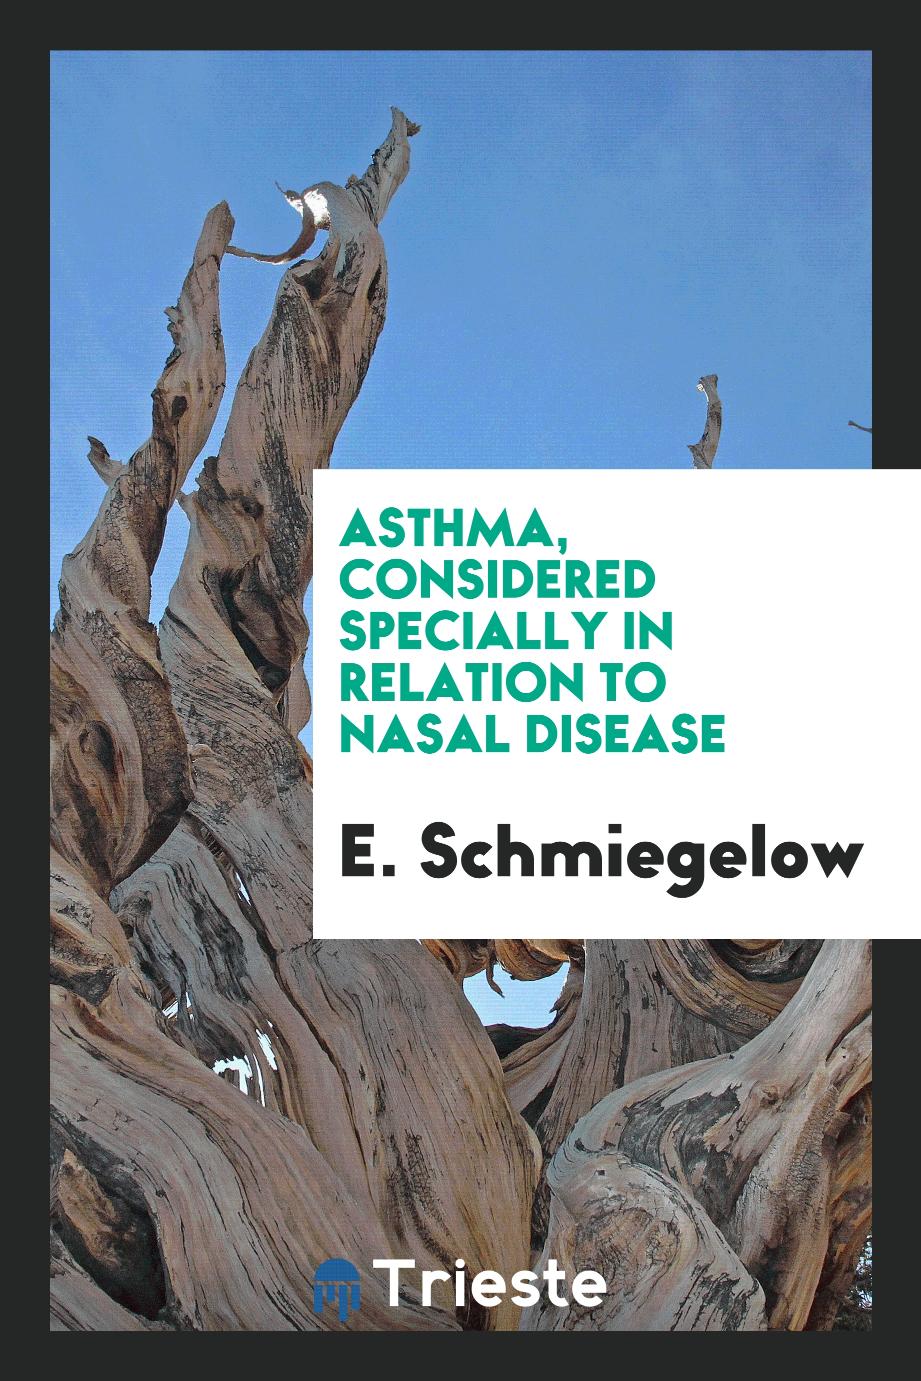 Asthma, Considered Specially in Relation to Nasal Disease